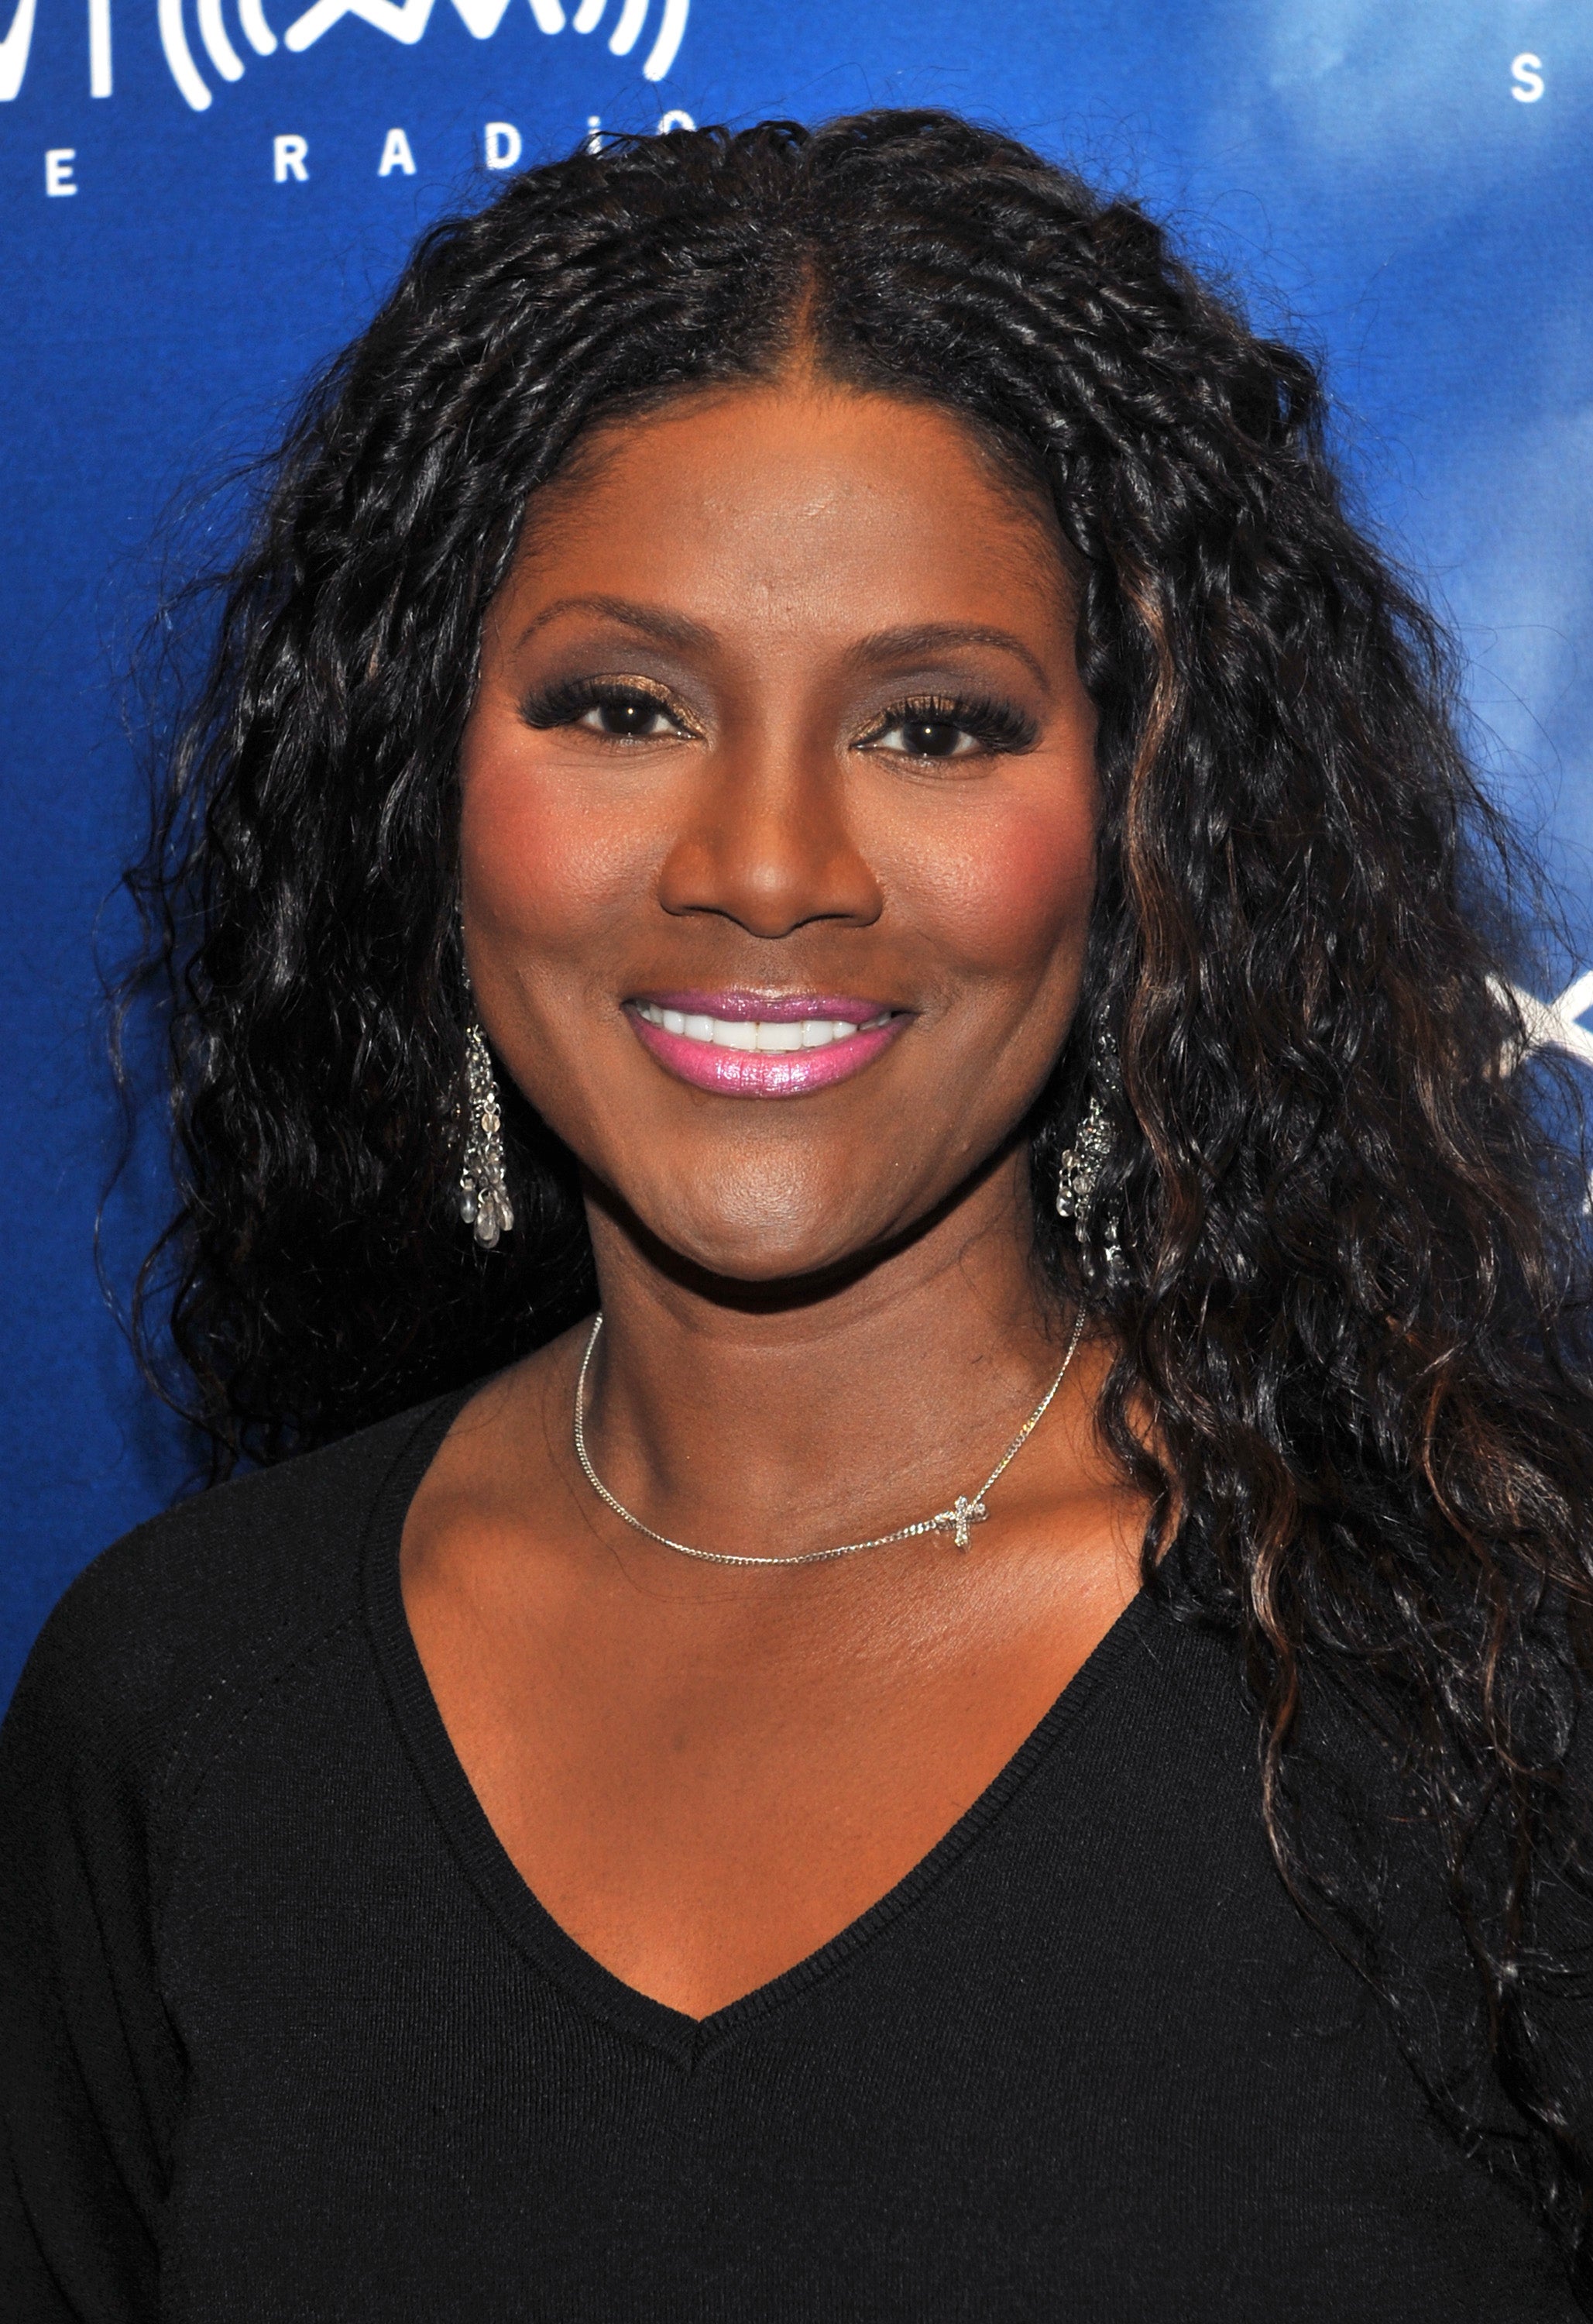 Juanita Bynum: I've Been with Women and Done Drugs